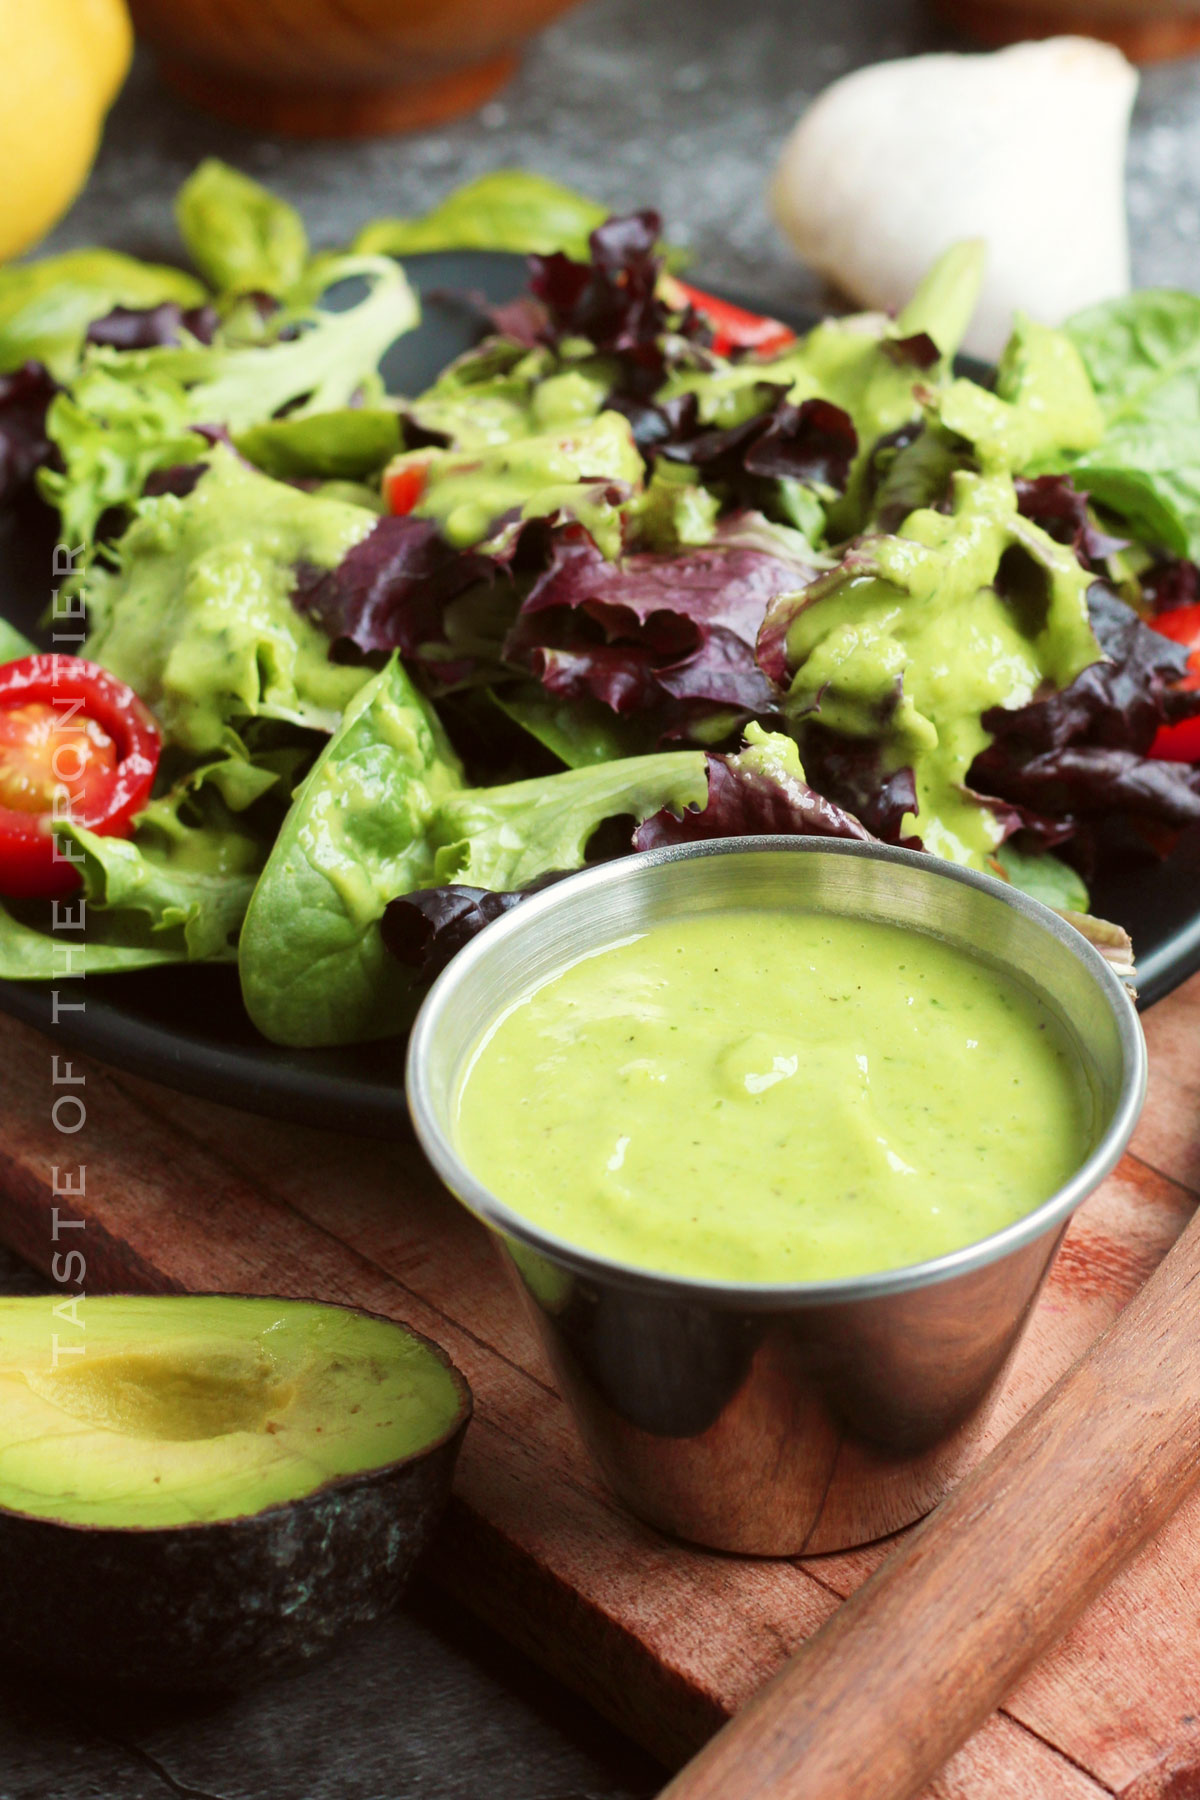 How to Make the Perfect Green Goddess Dressing - Thrillist